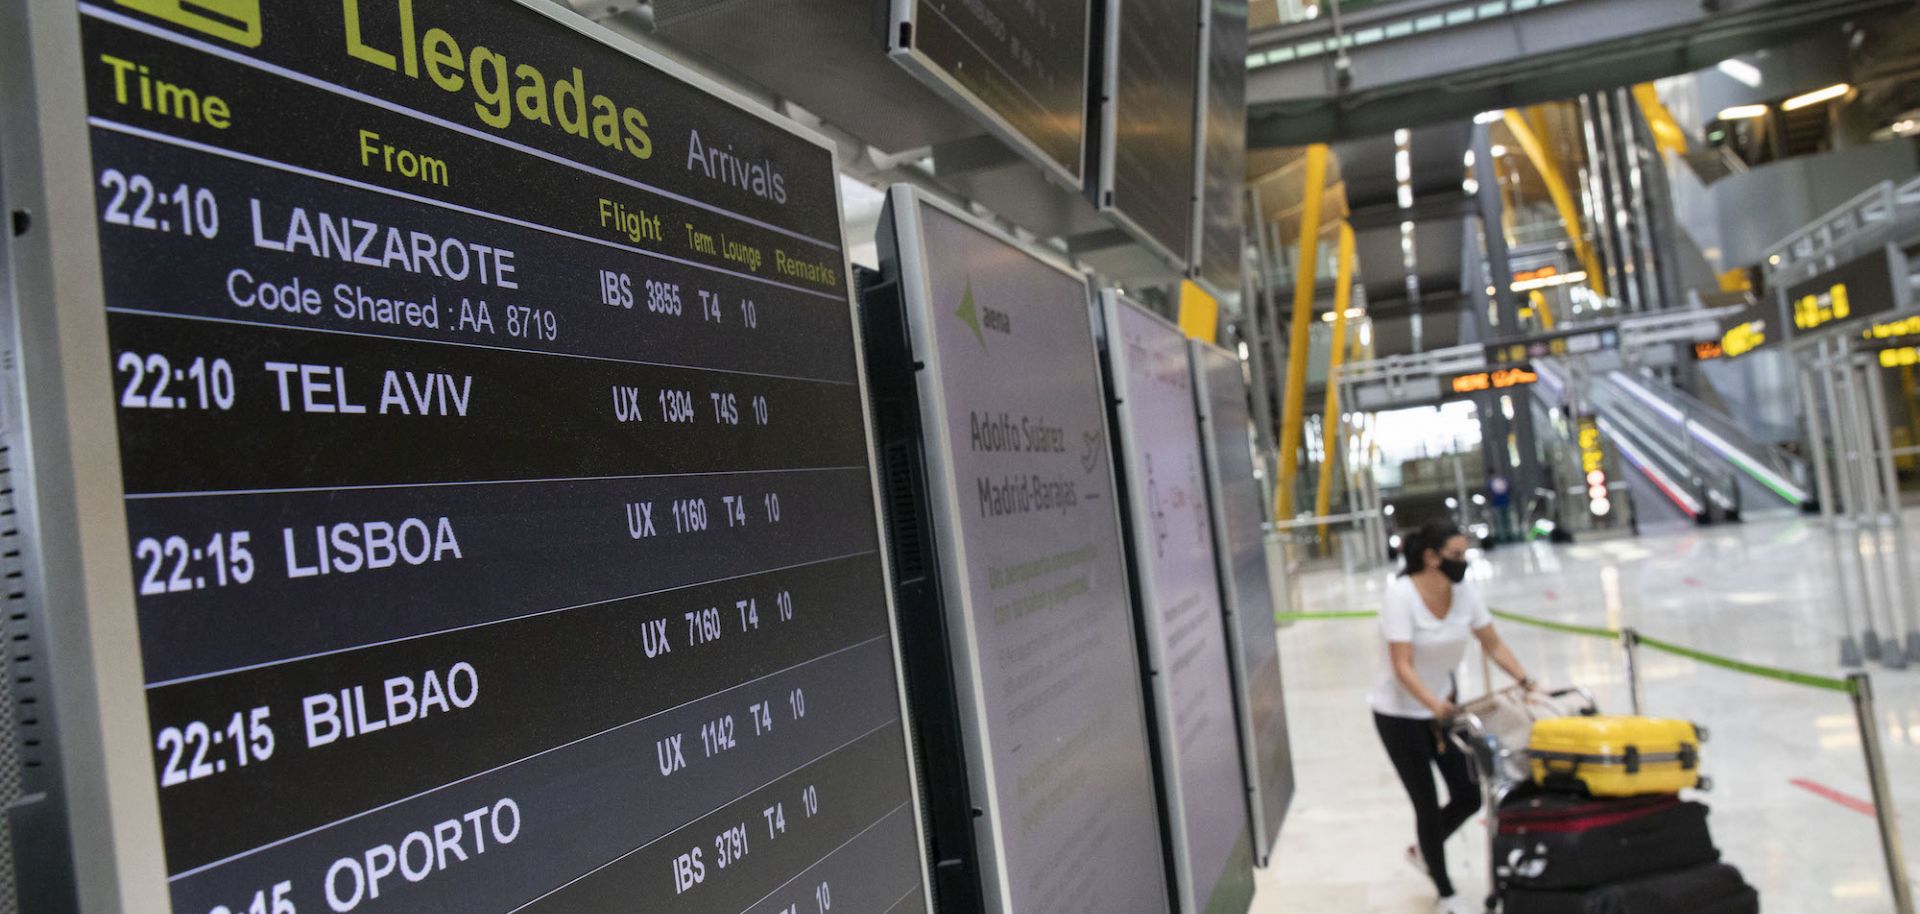 A travelers carry her luggage as she walks past an arrivals flight information display at Adolfo Suárez Madrid-Barajas airport on June 07, 2021 in Madrid, Spain. Spain, the world's second most visited tourism destination, has re-opened borders to vaccinated visitors worldwide as well as non-vaccinated Europeans with a negative antigen test.